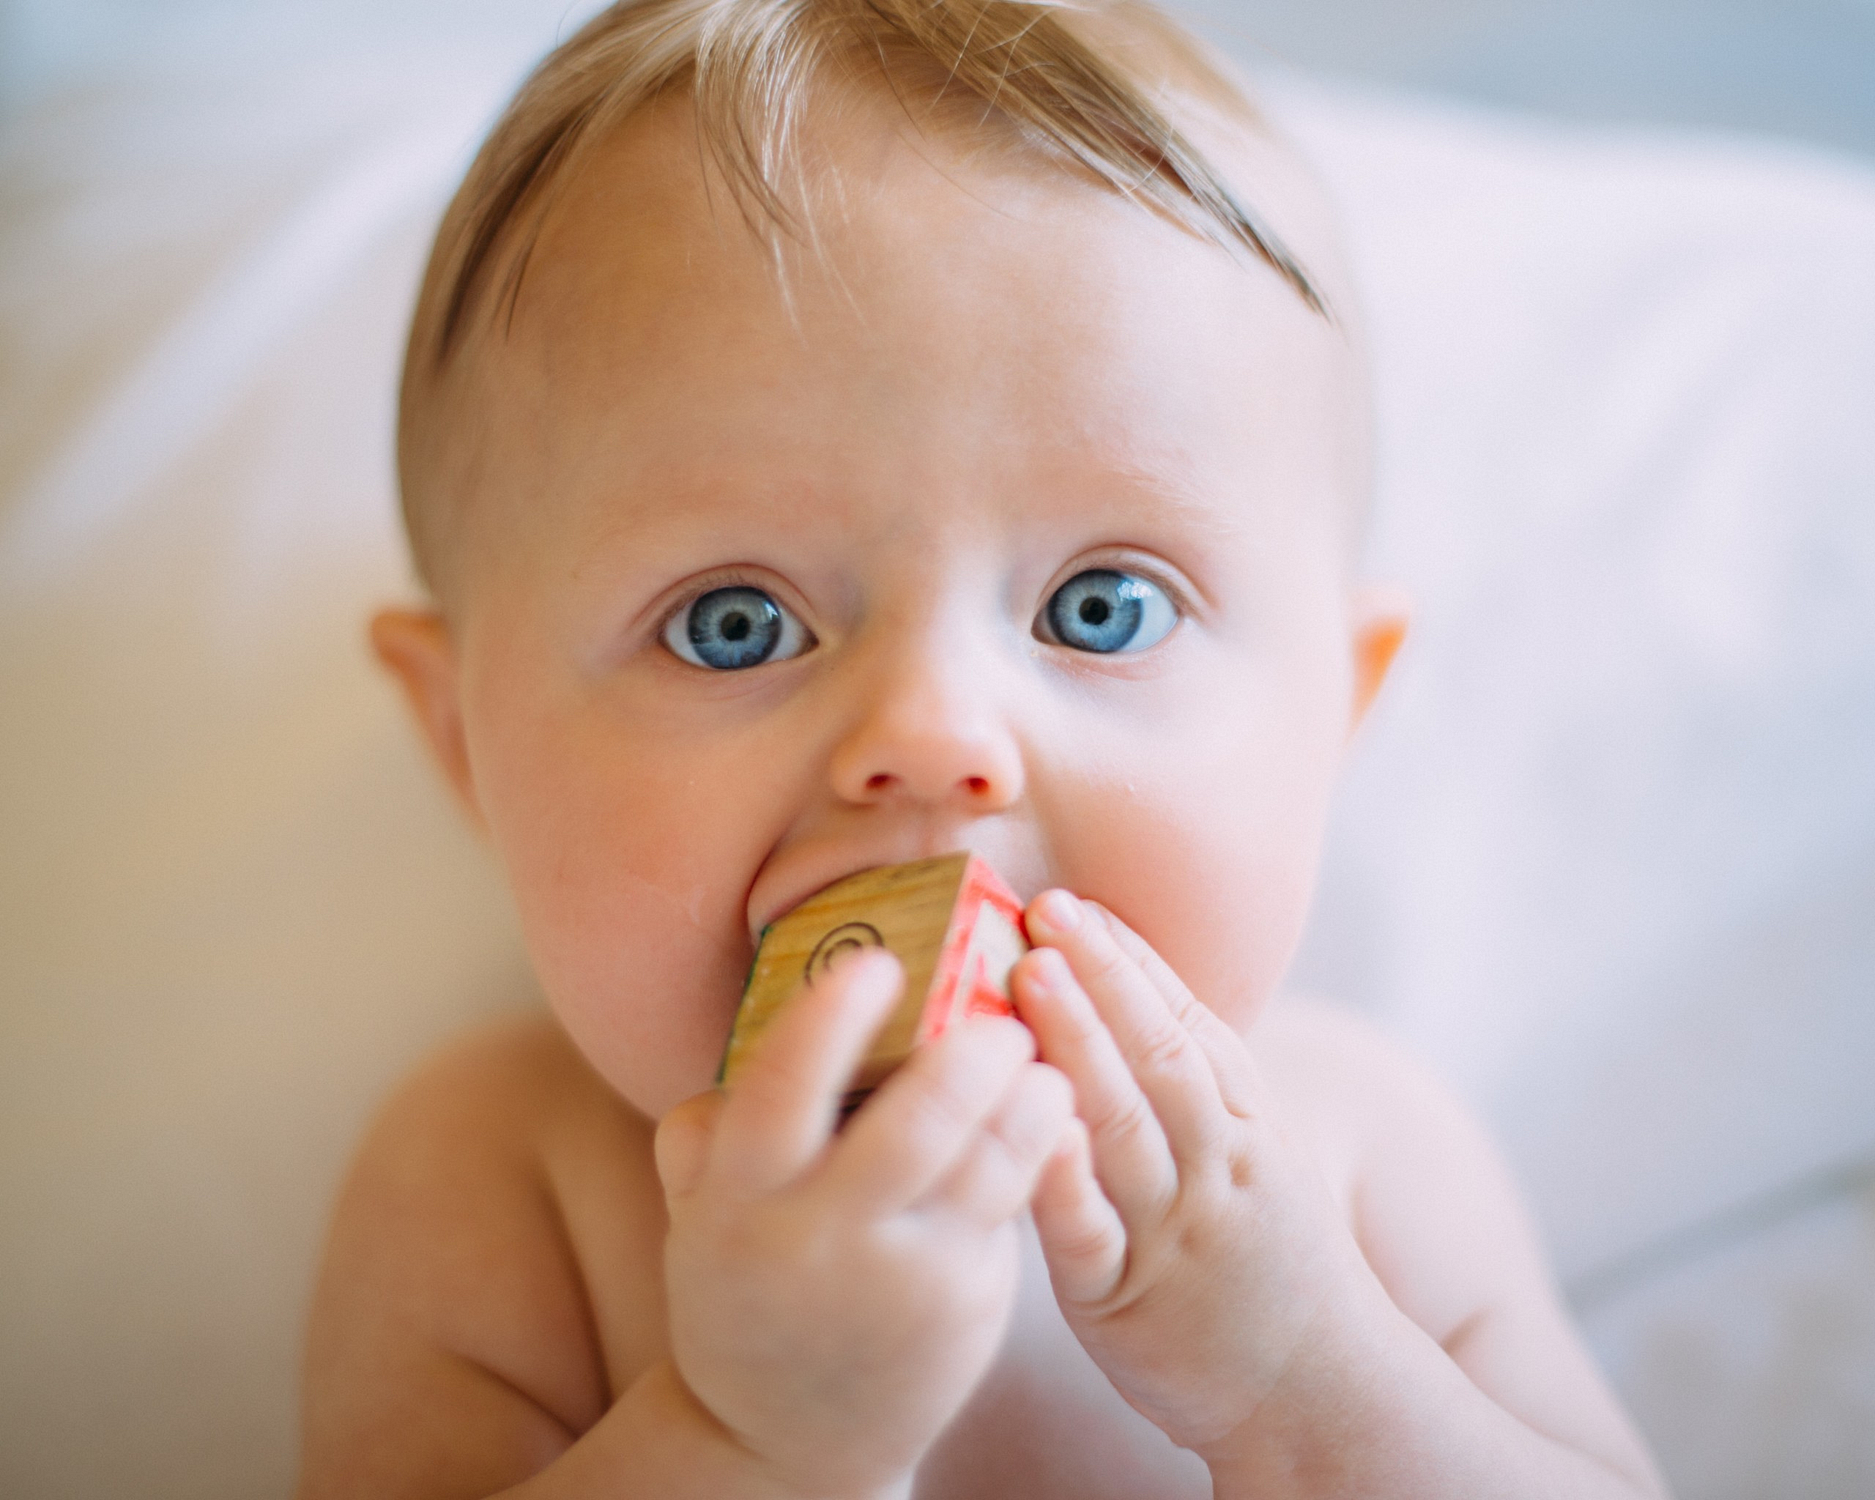 What Are the Healthiest Infant Formulas?